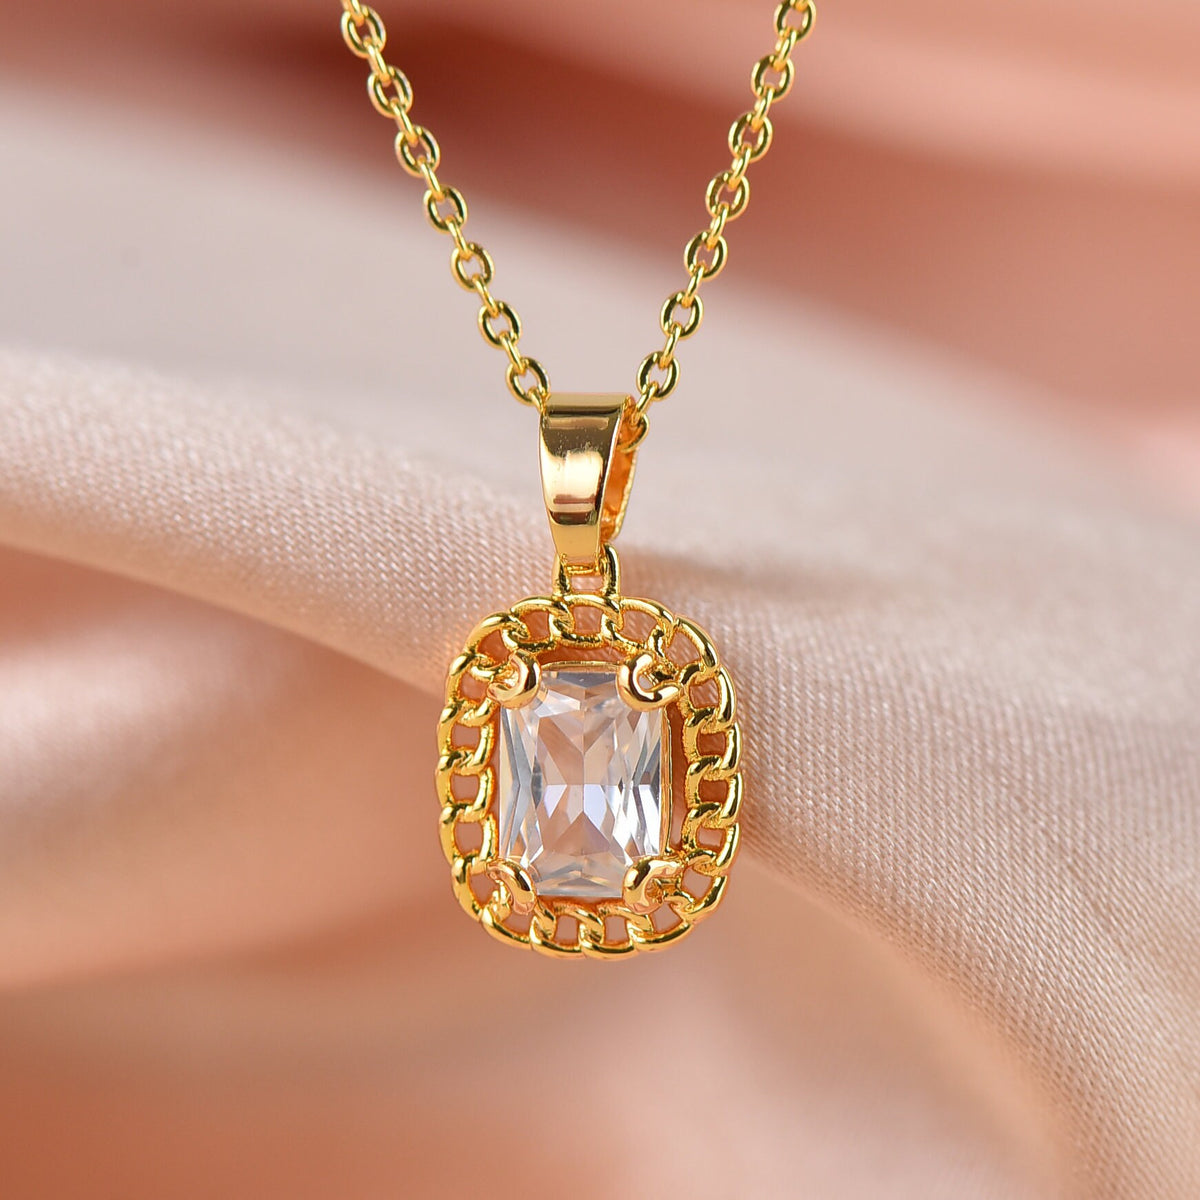 Gold Connector Charm For Necklace, CZ Connector Charm With Radiant Cut Stone In The Middle, MP4-31